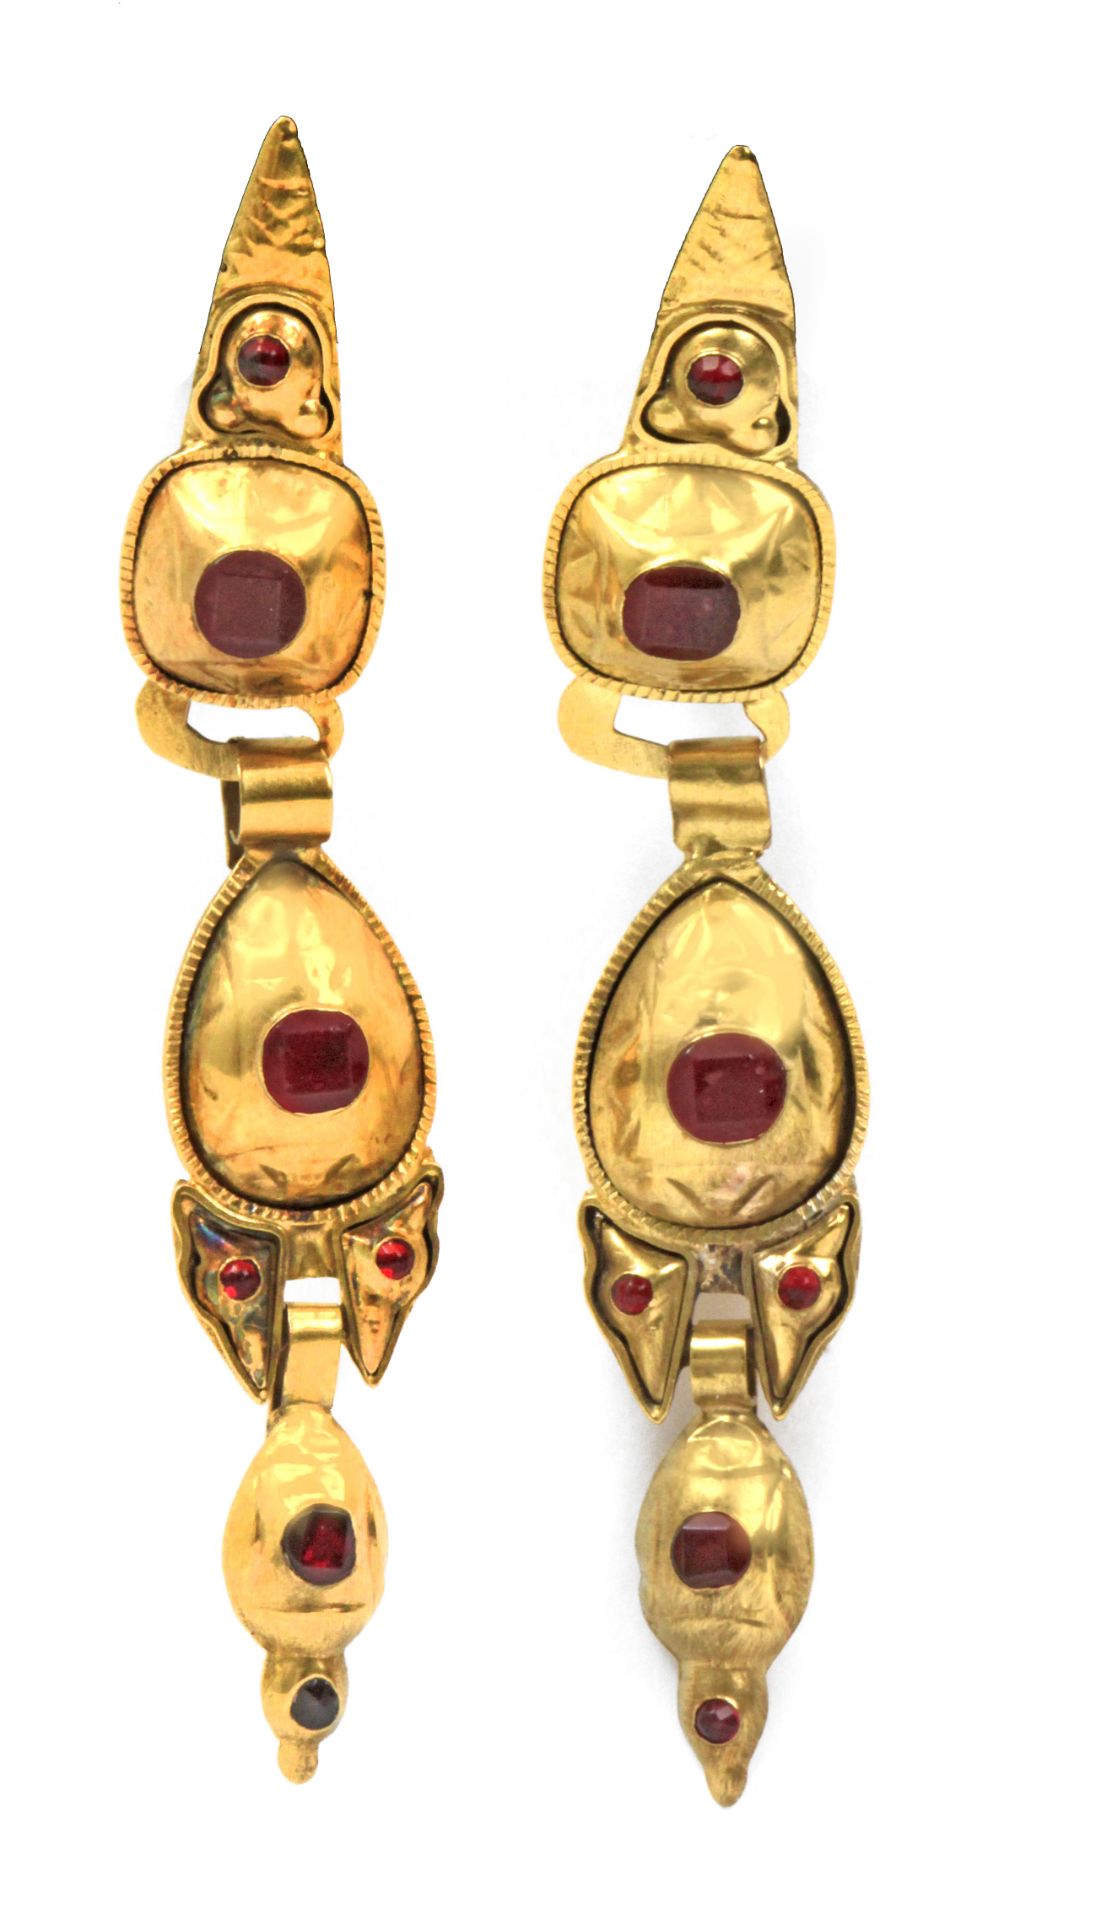 A pair of late 18th century-early 19th century Catalan or Aragonese earrings